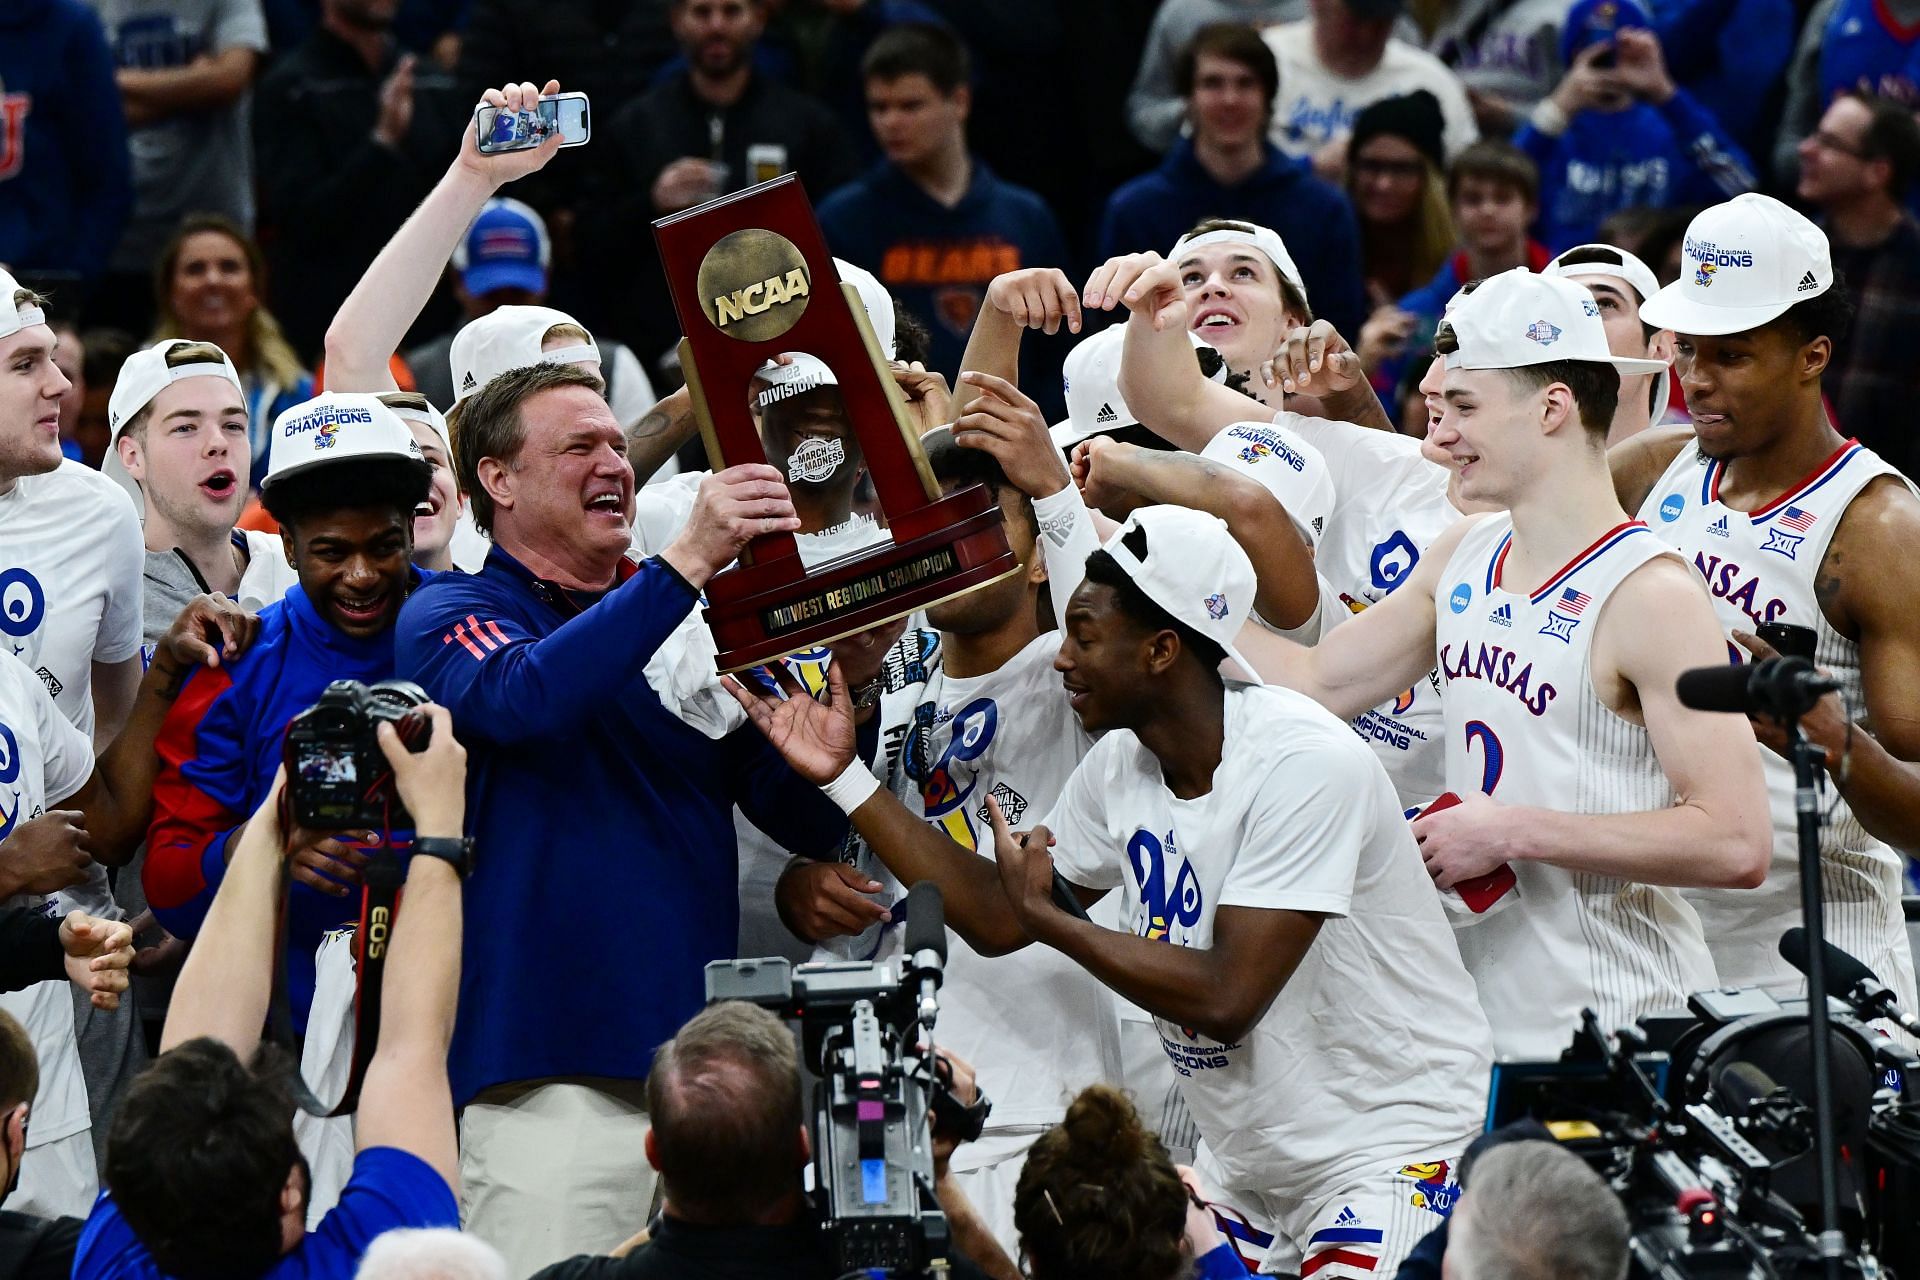 Bill Self and the Kansas Jayhawks won the Midwest Region to reach the Final 4.